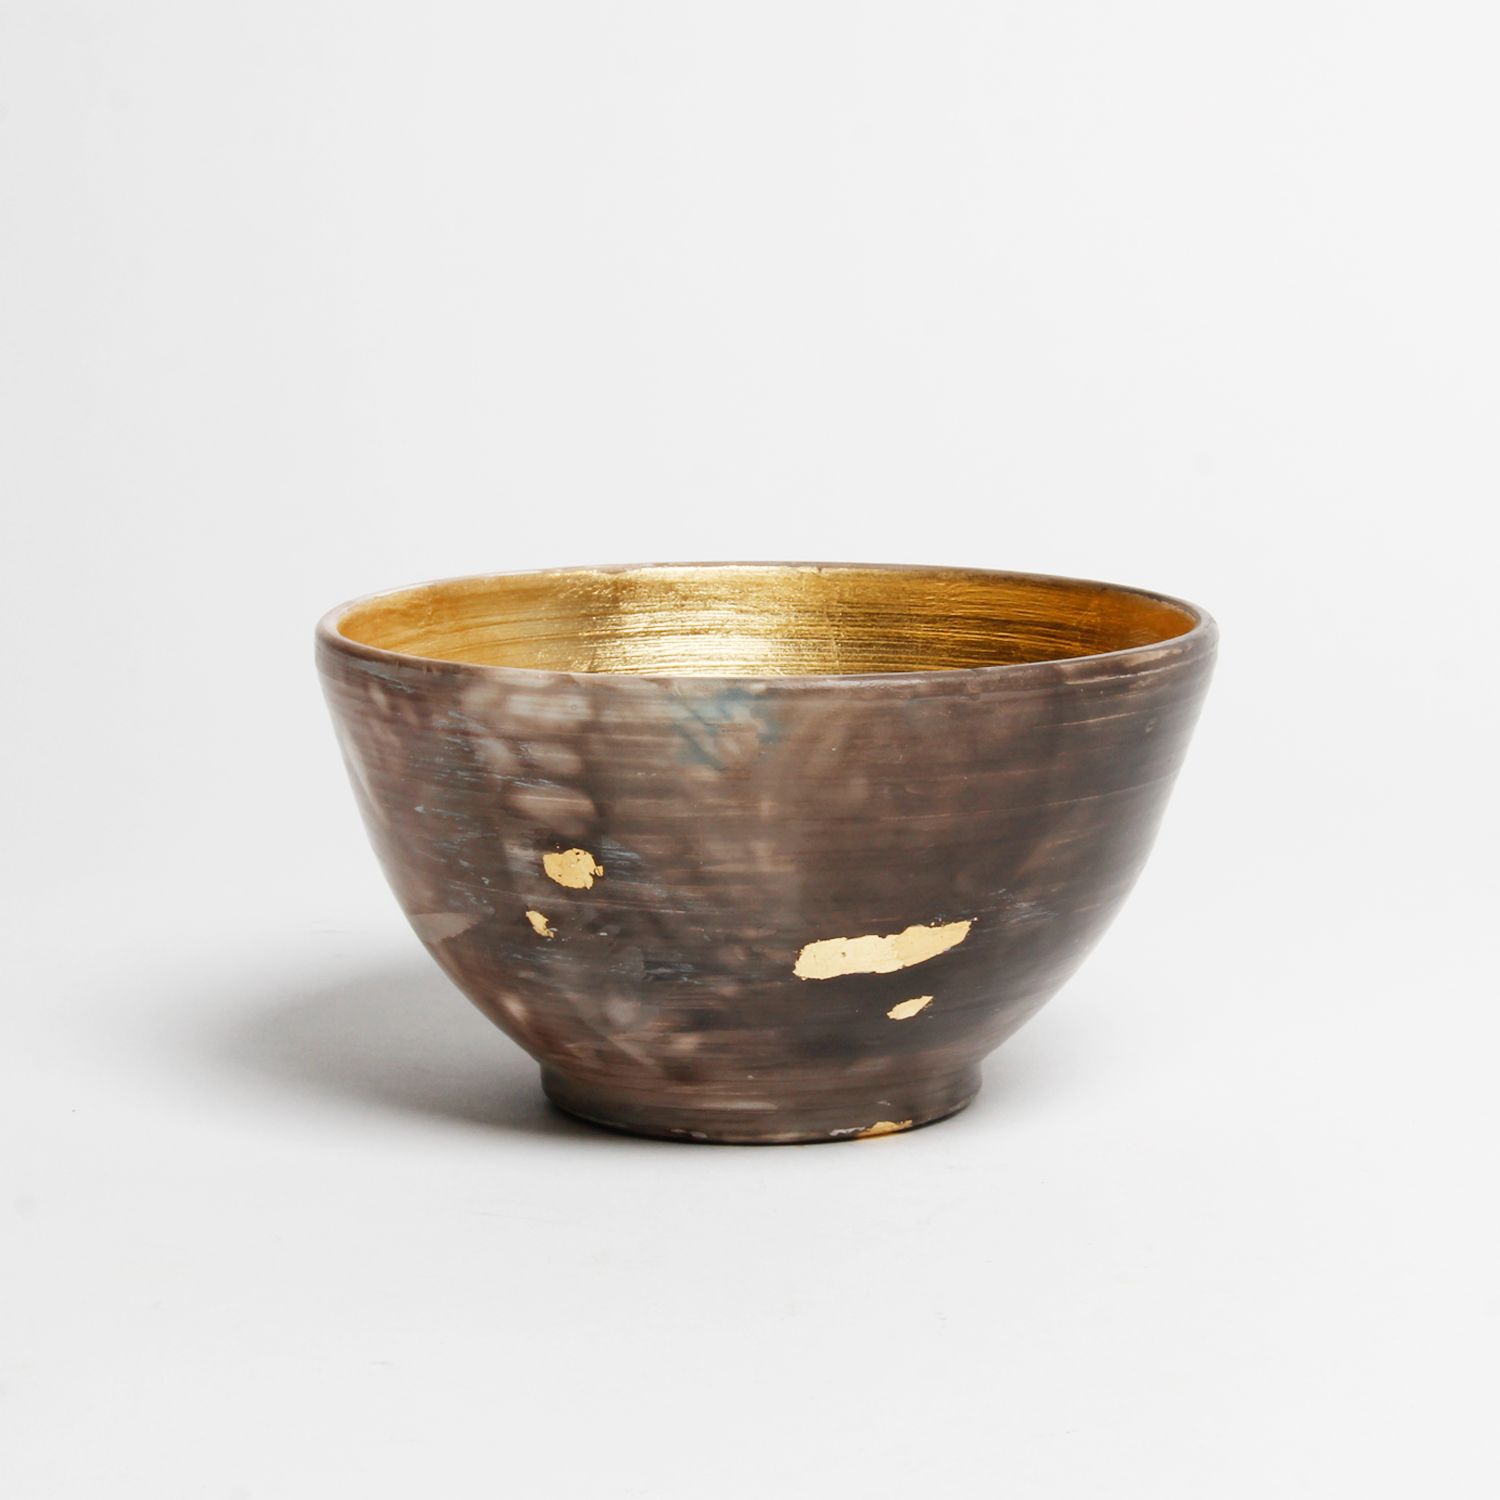 Susan Card: Smoke Fired Bowl (Each Sold Separately) Product Image 5 of 7